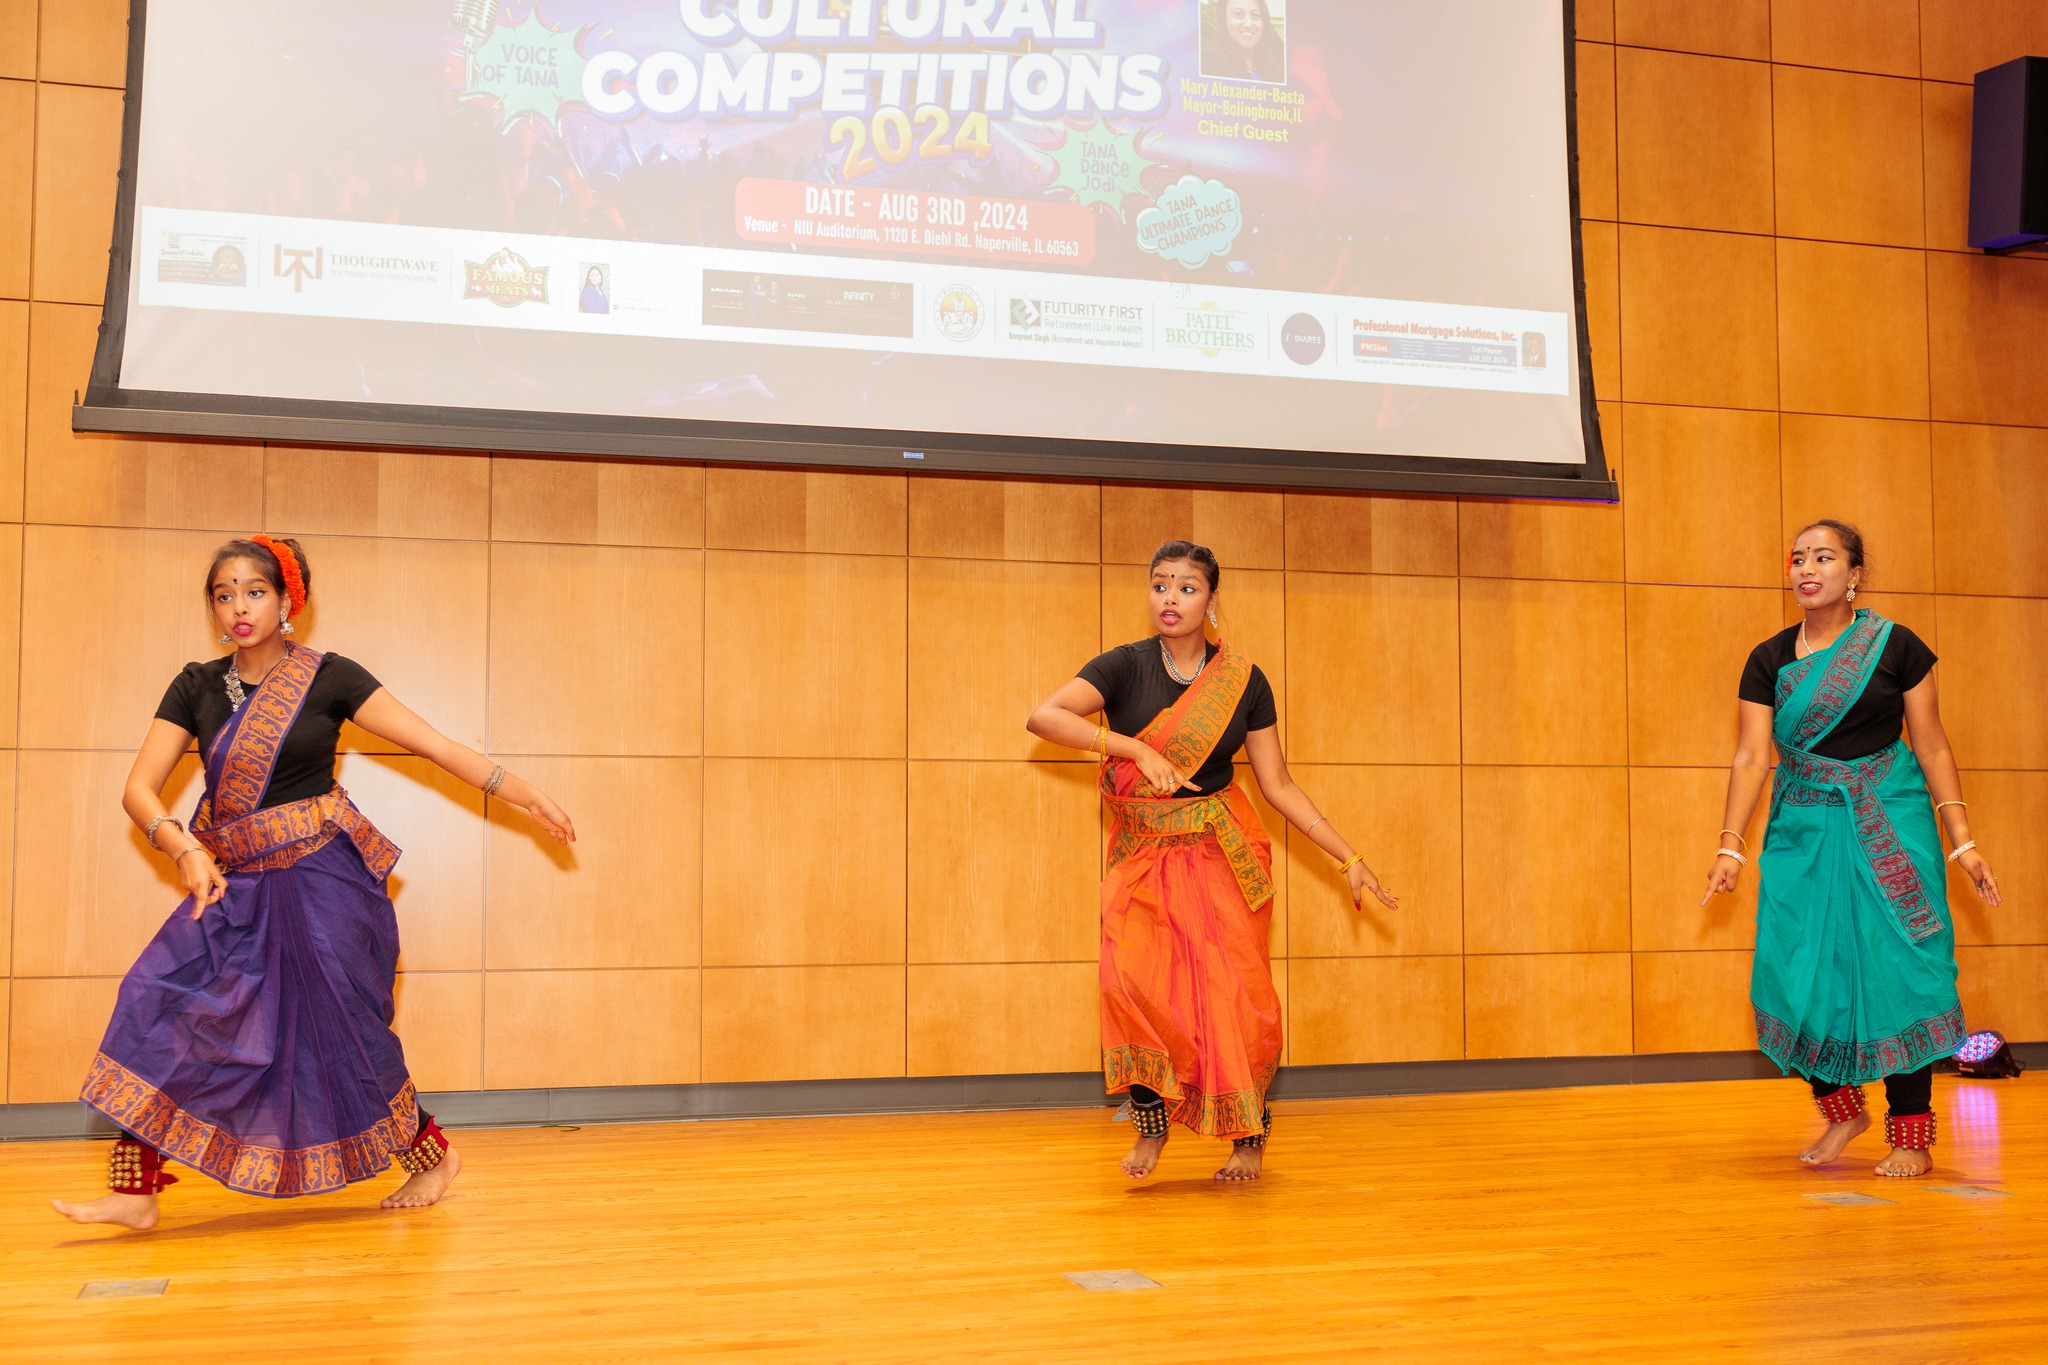 Tana Cultural Competitions started grandly in America (2)